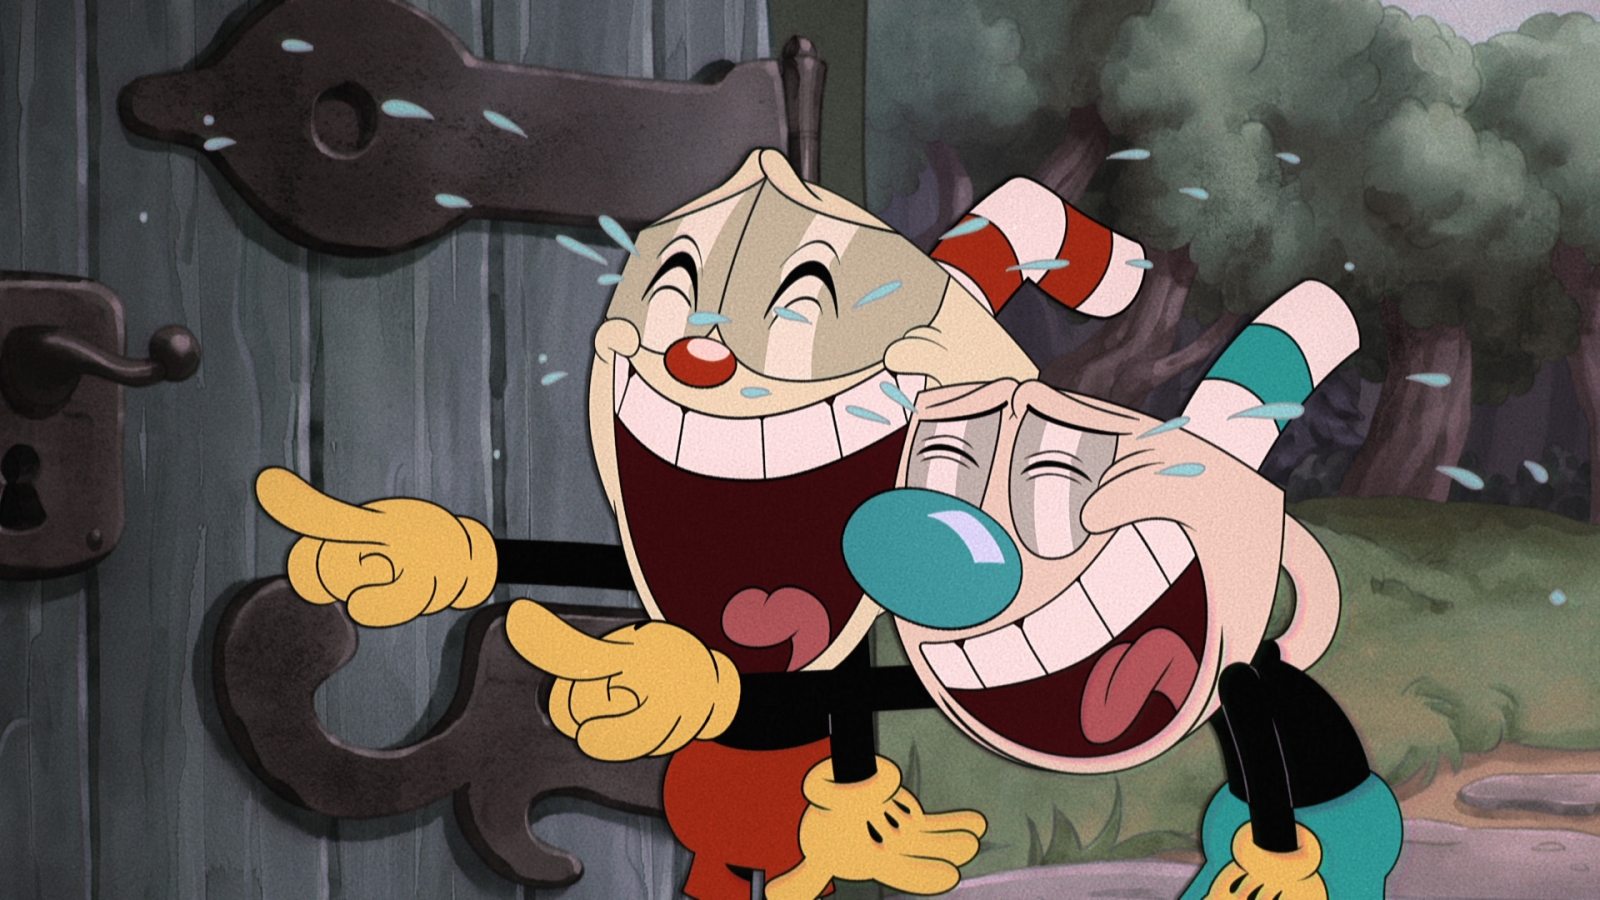 The Cuphead Show season four release date, trailer, and more